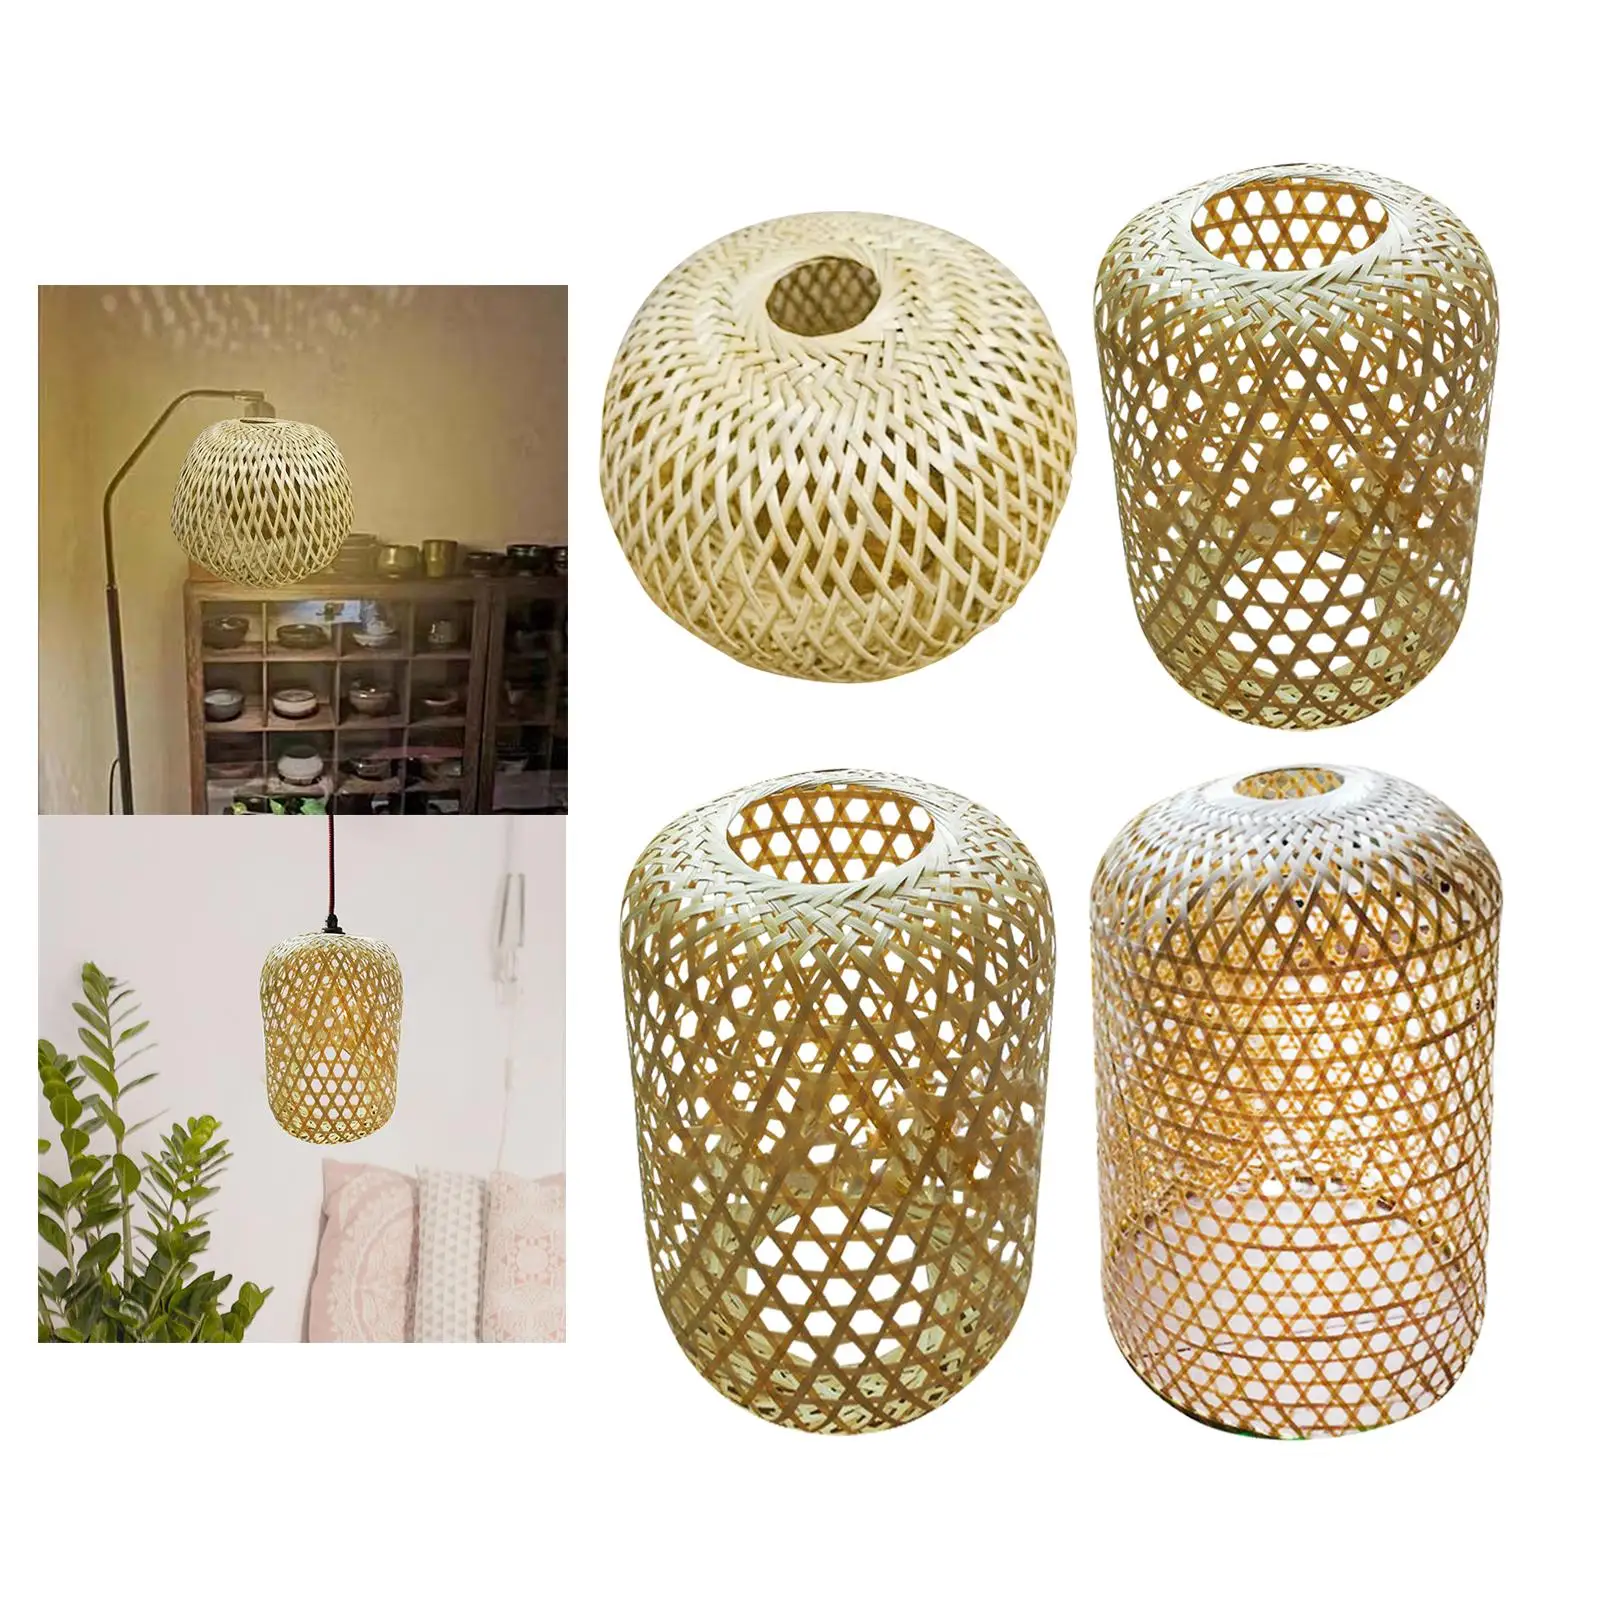 Handmade Weaving Lamp Shade Ceiling Light Cover Lantern Decorative Lamp Accessory for Bedroom Tea House Home Decoration